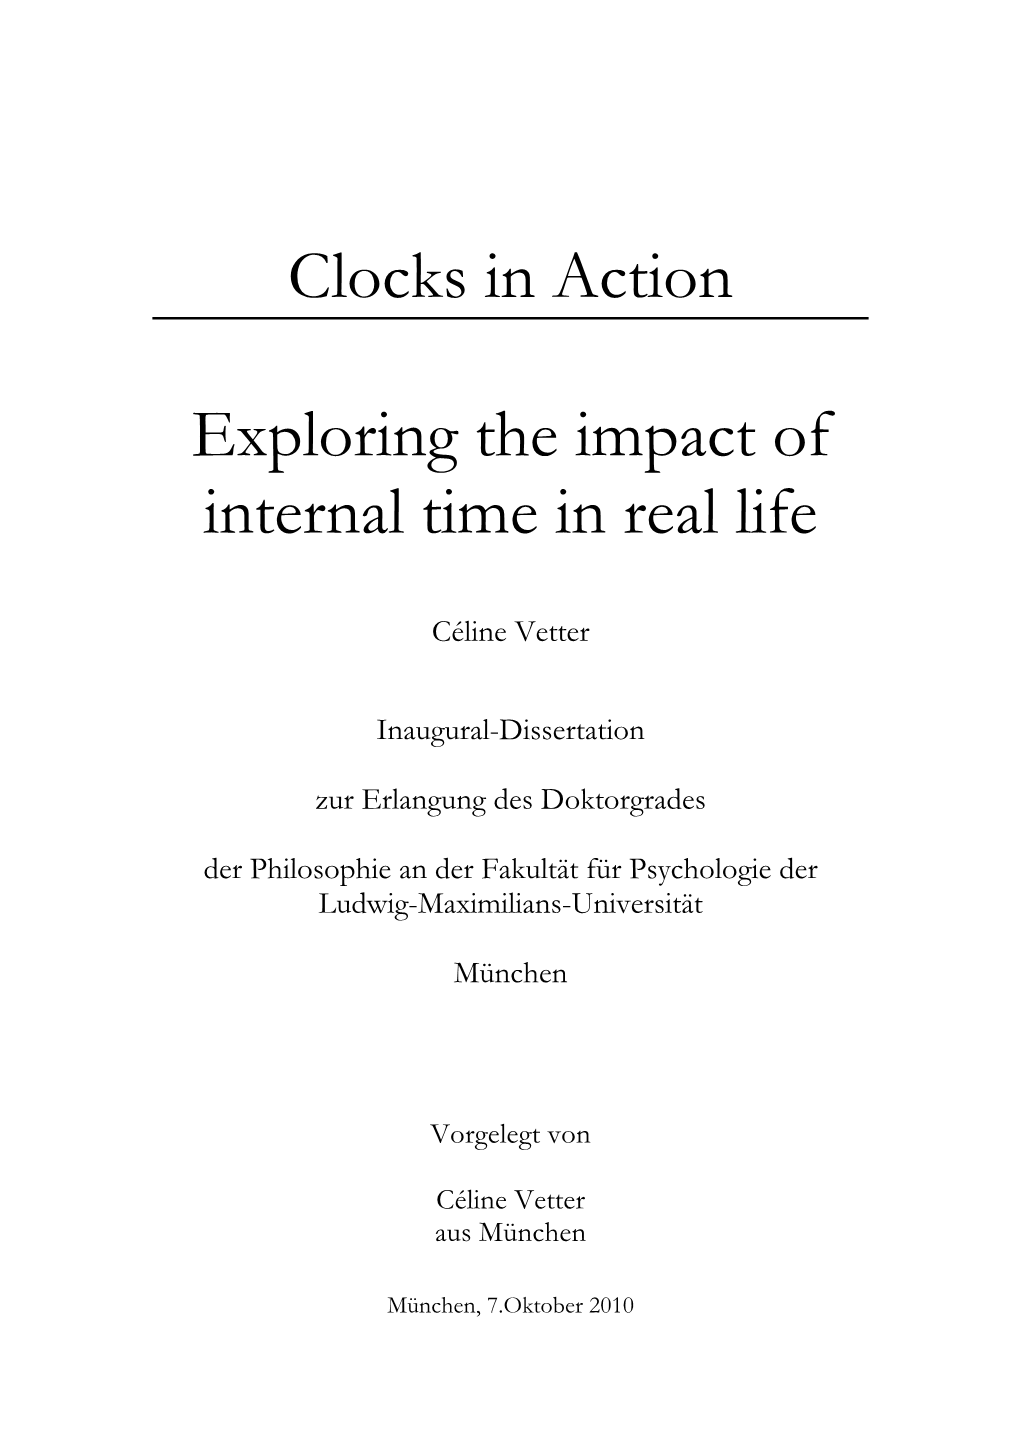 Clocks in Action: Exploring the Impact of Internal Time in Real Life